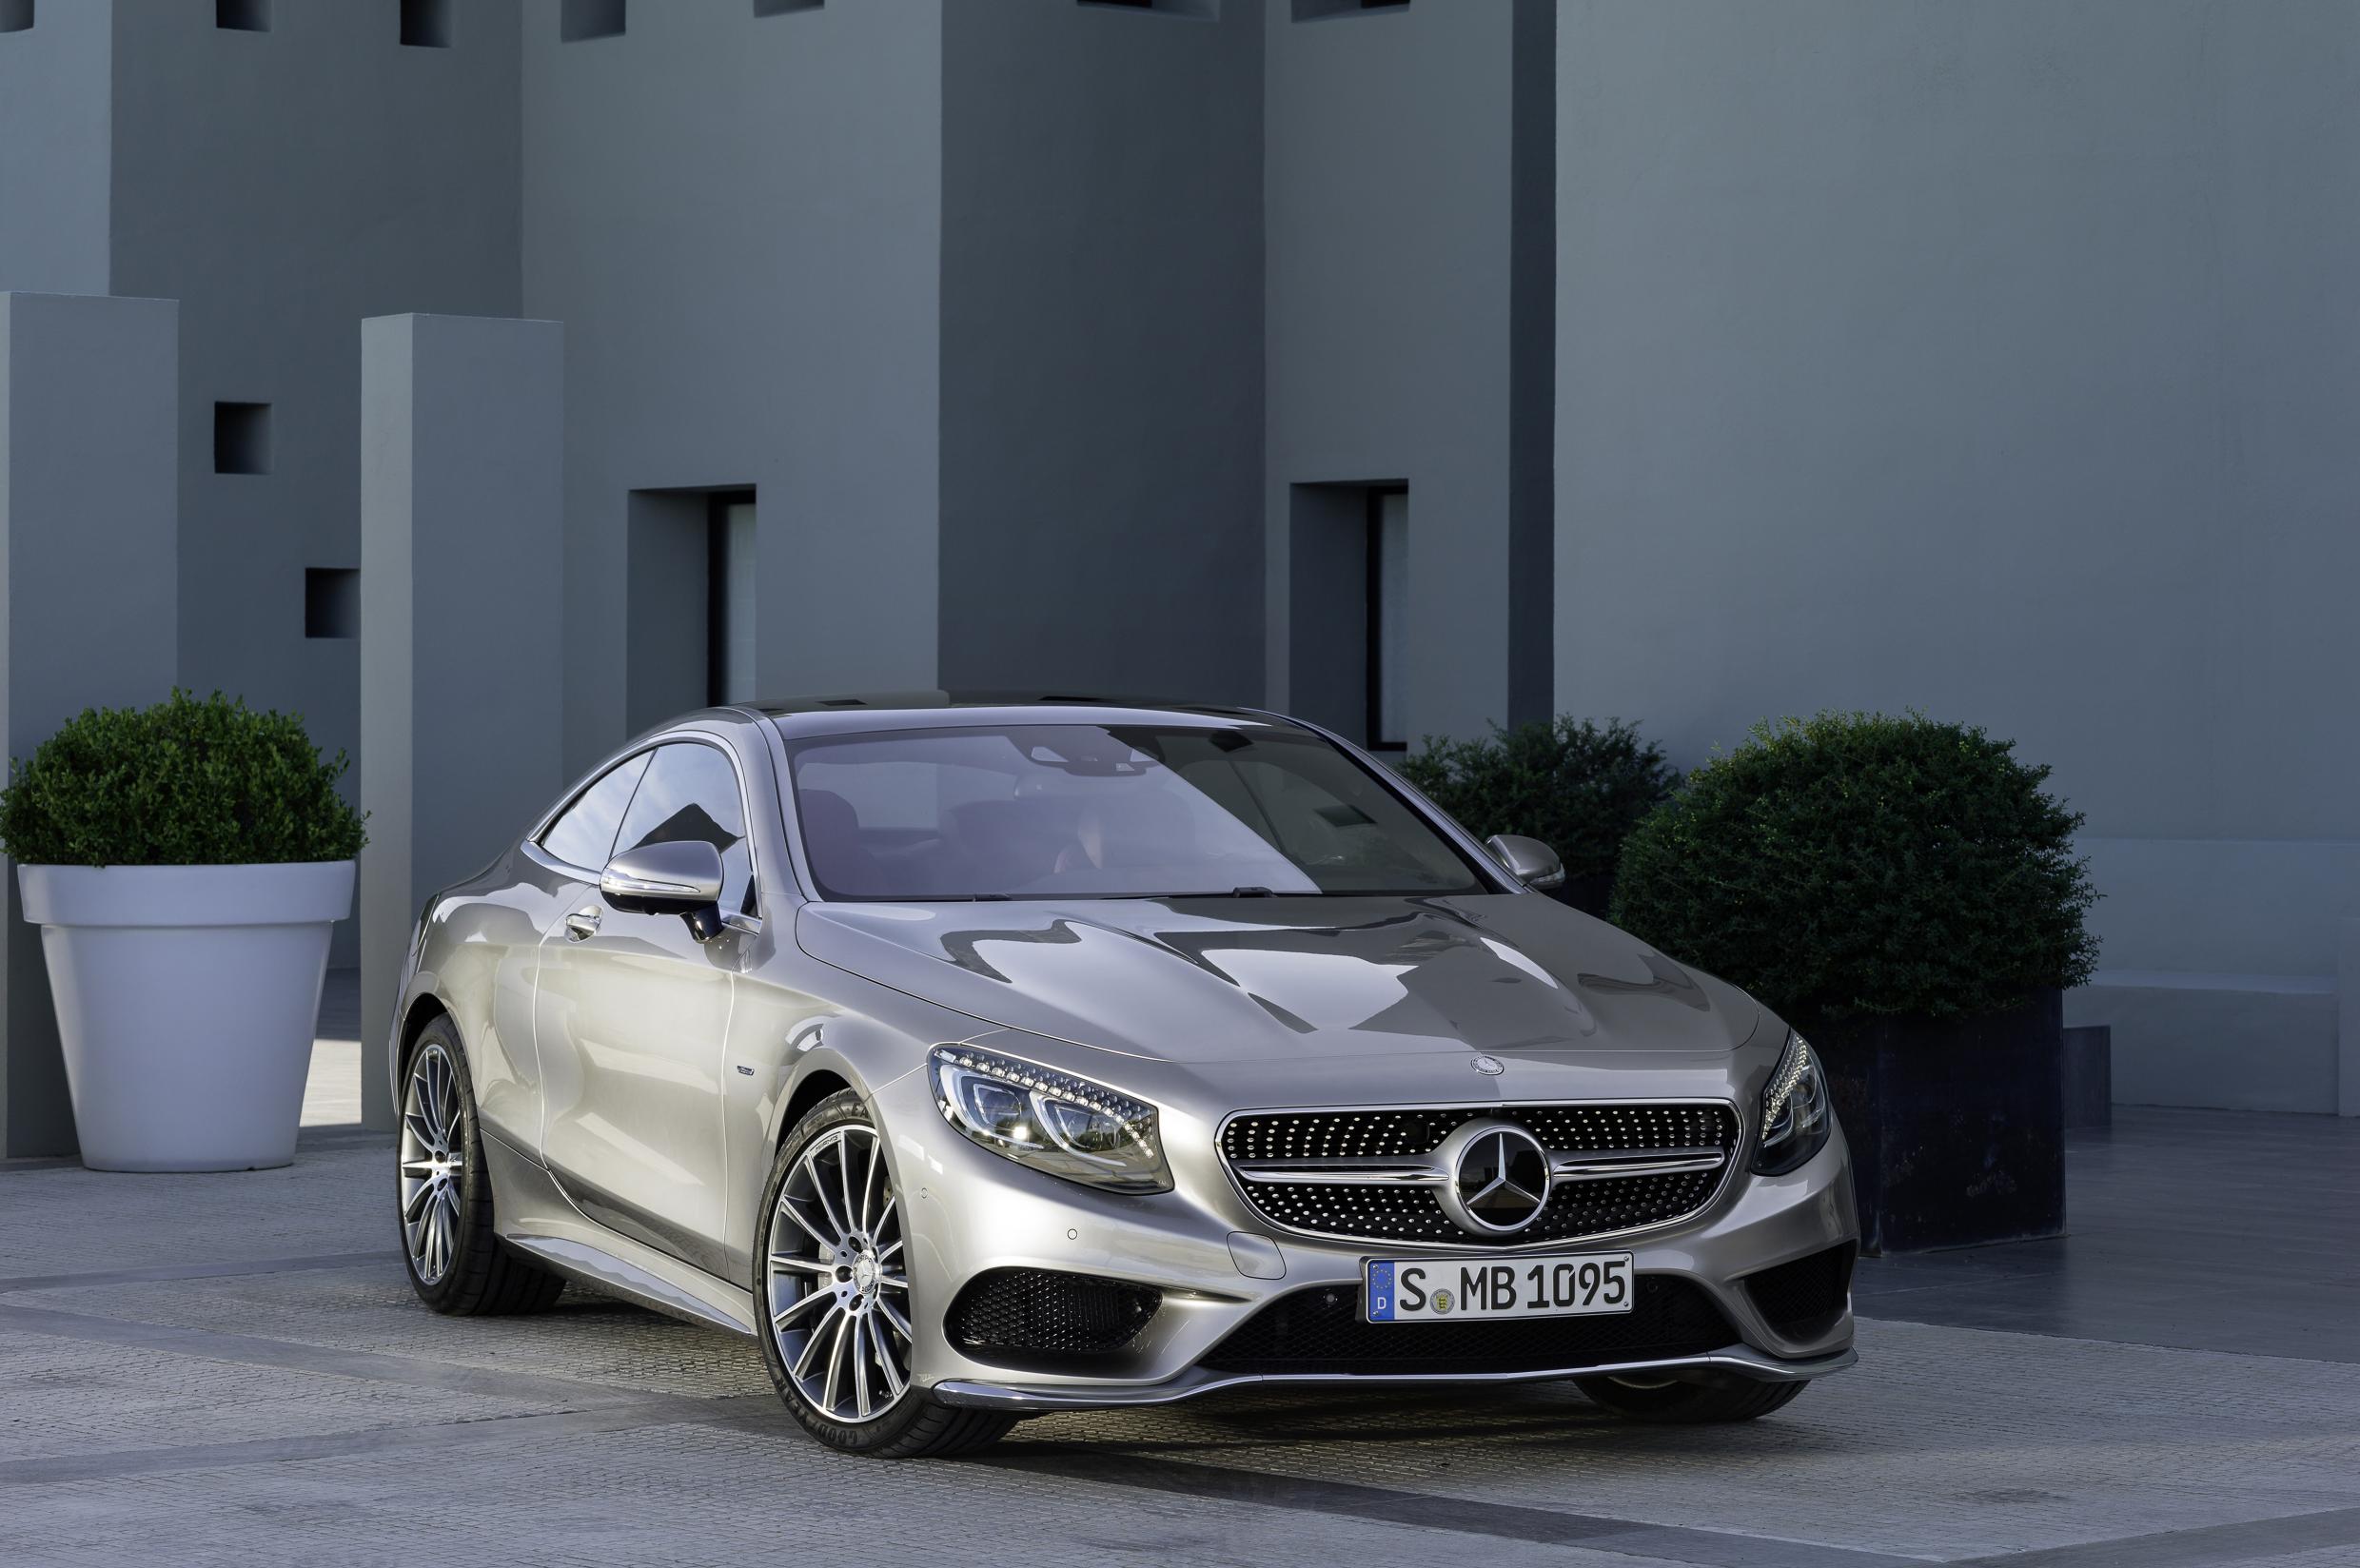 2015 S-Class Coupe (13)